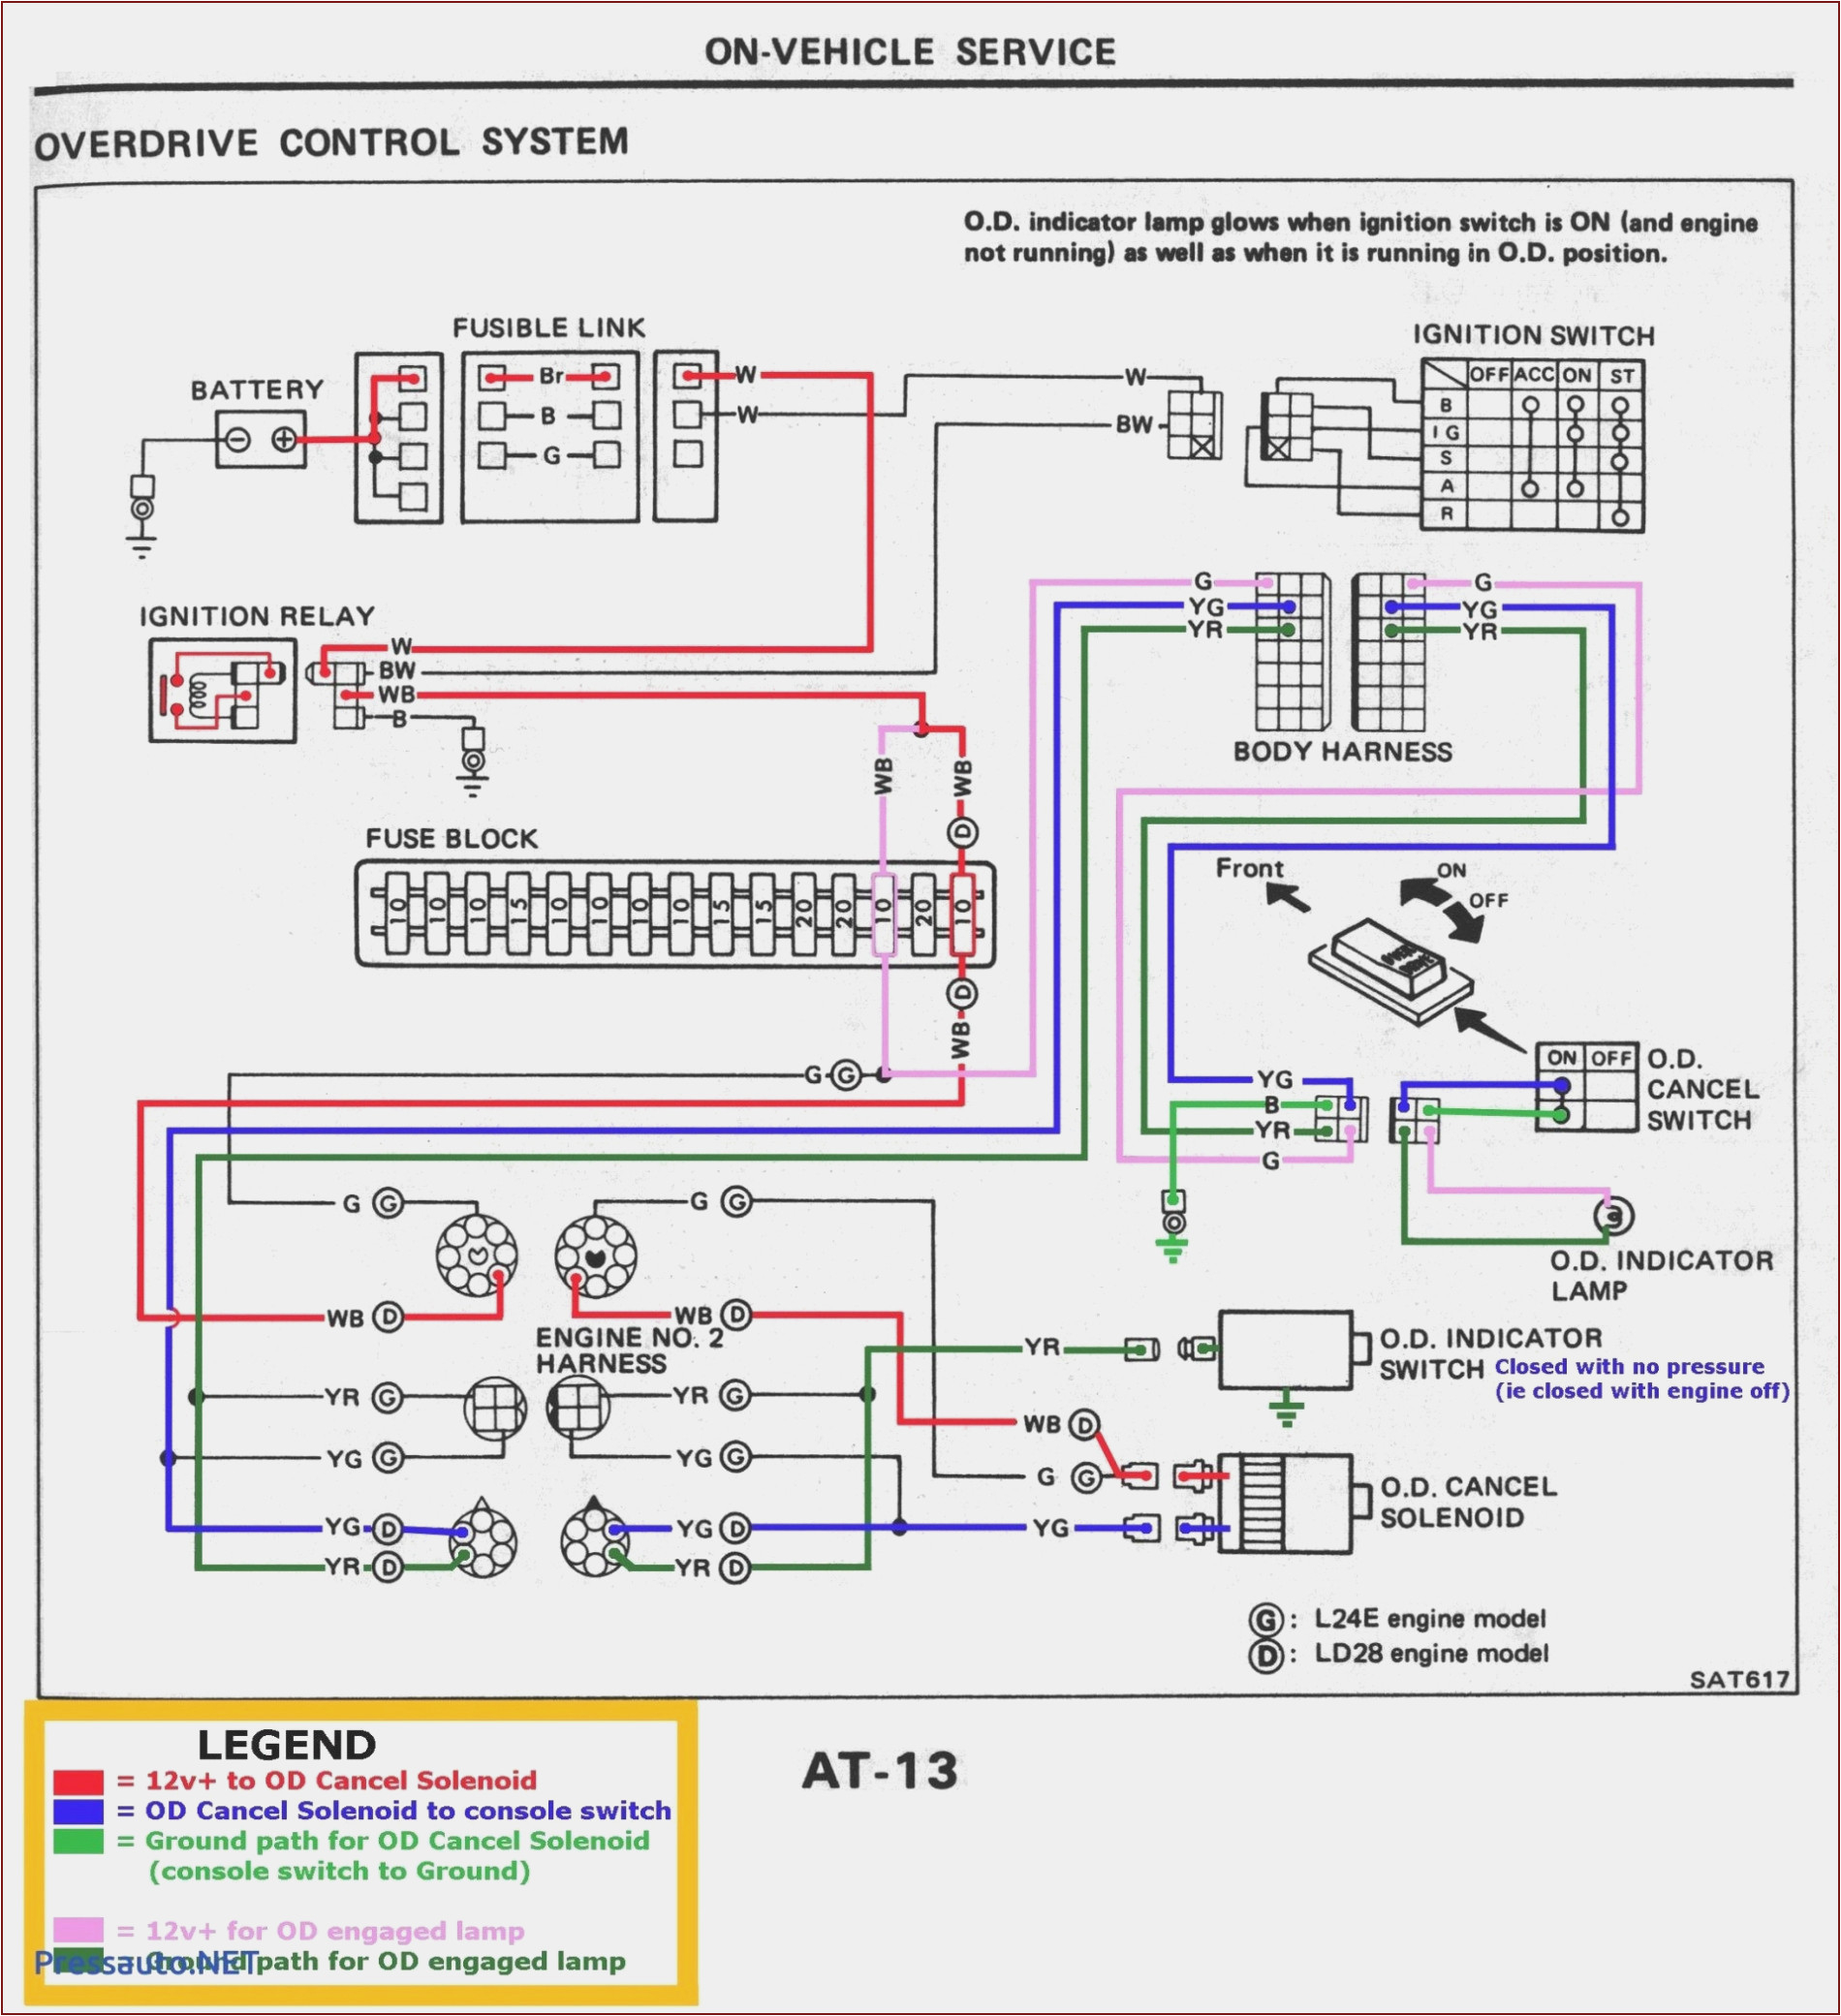 Gps Tracker Wiring Diagram Electrical Wiring Diagrams for Dummies at Manuals Library